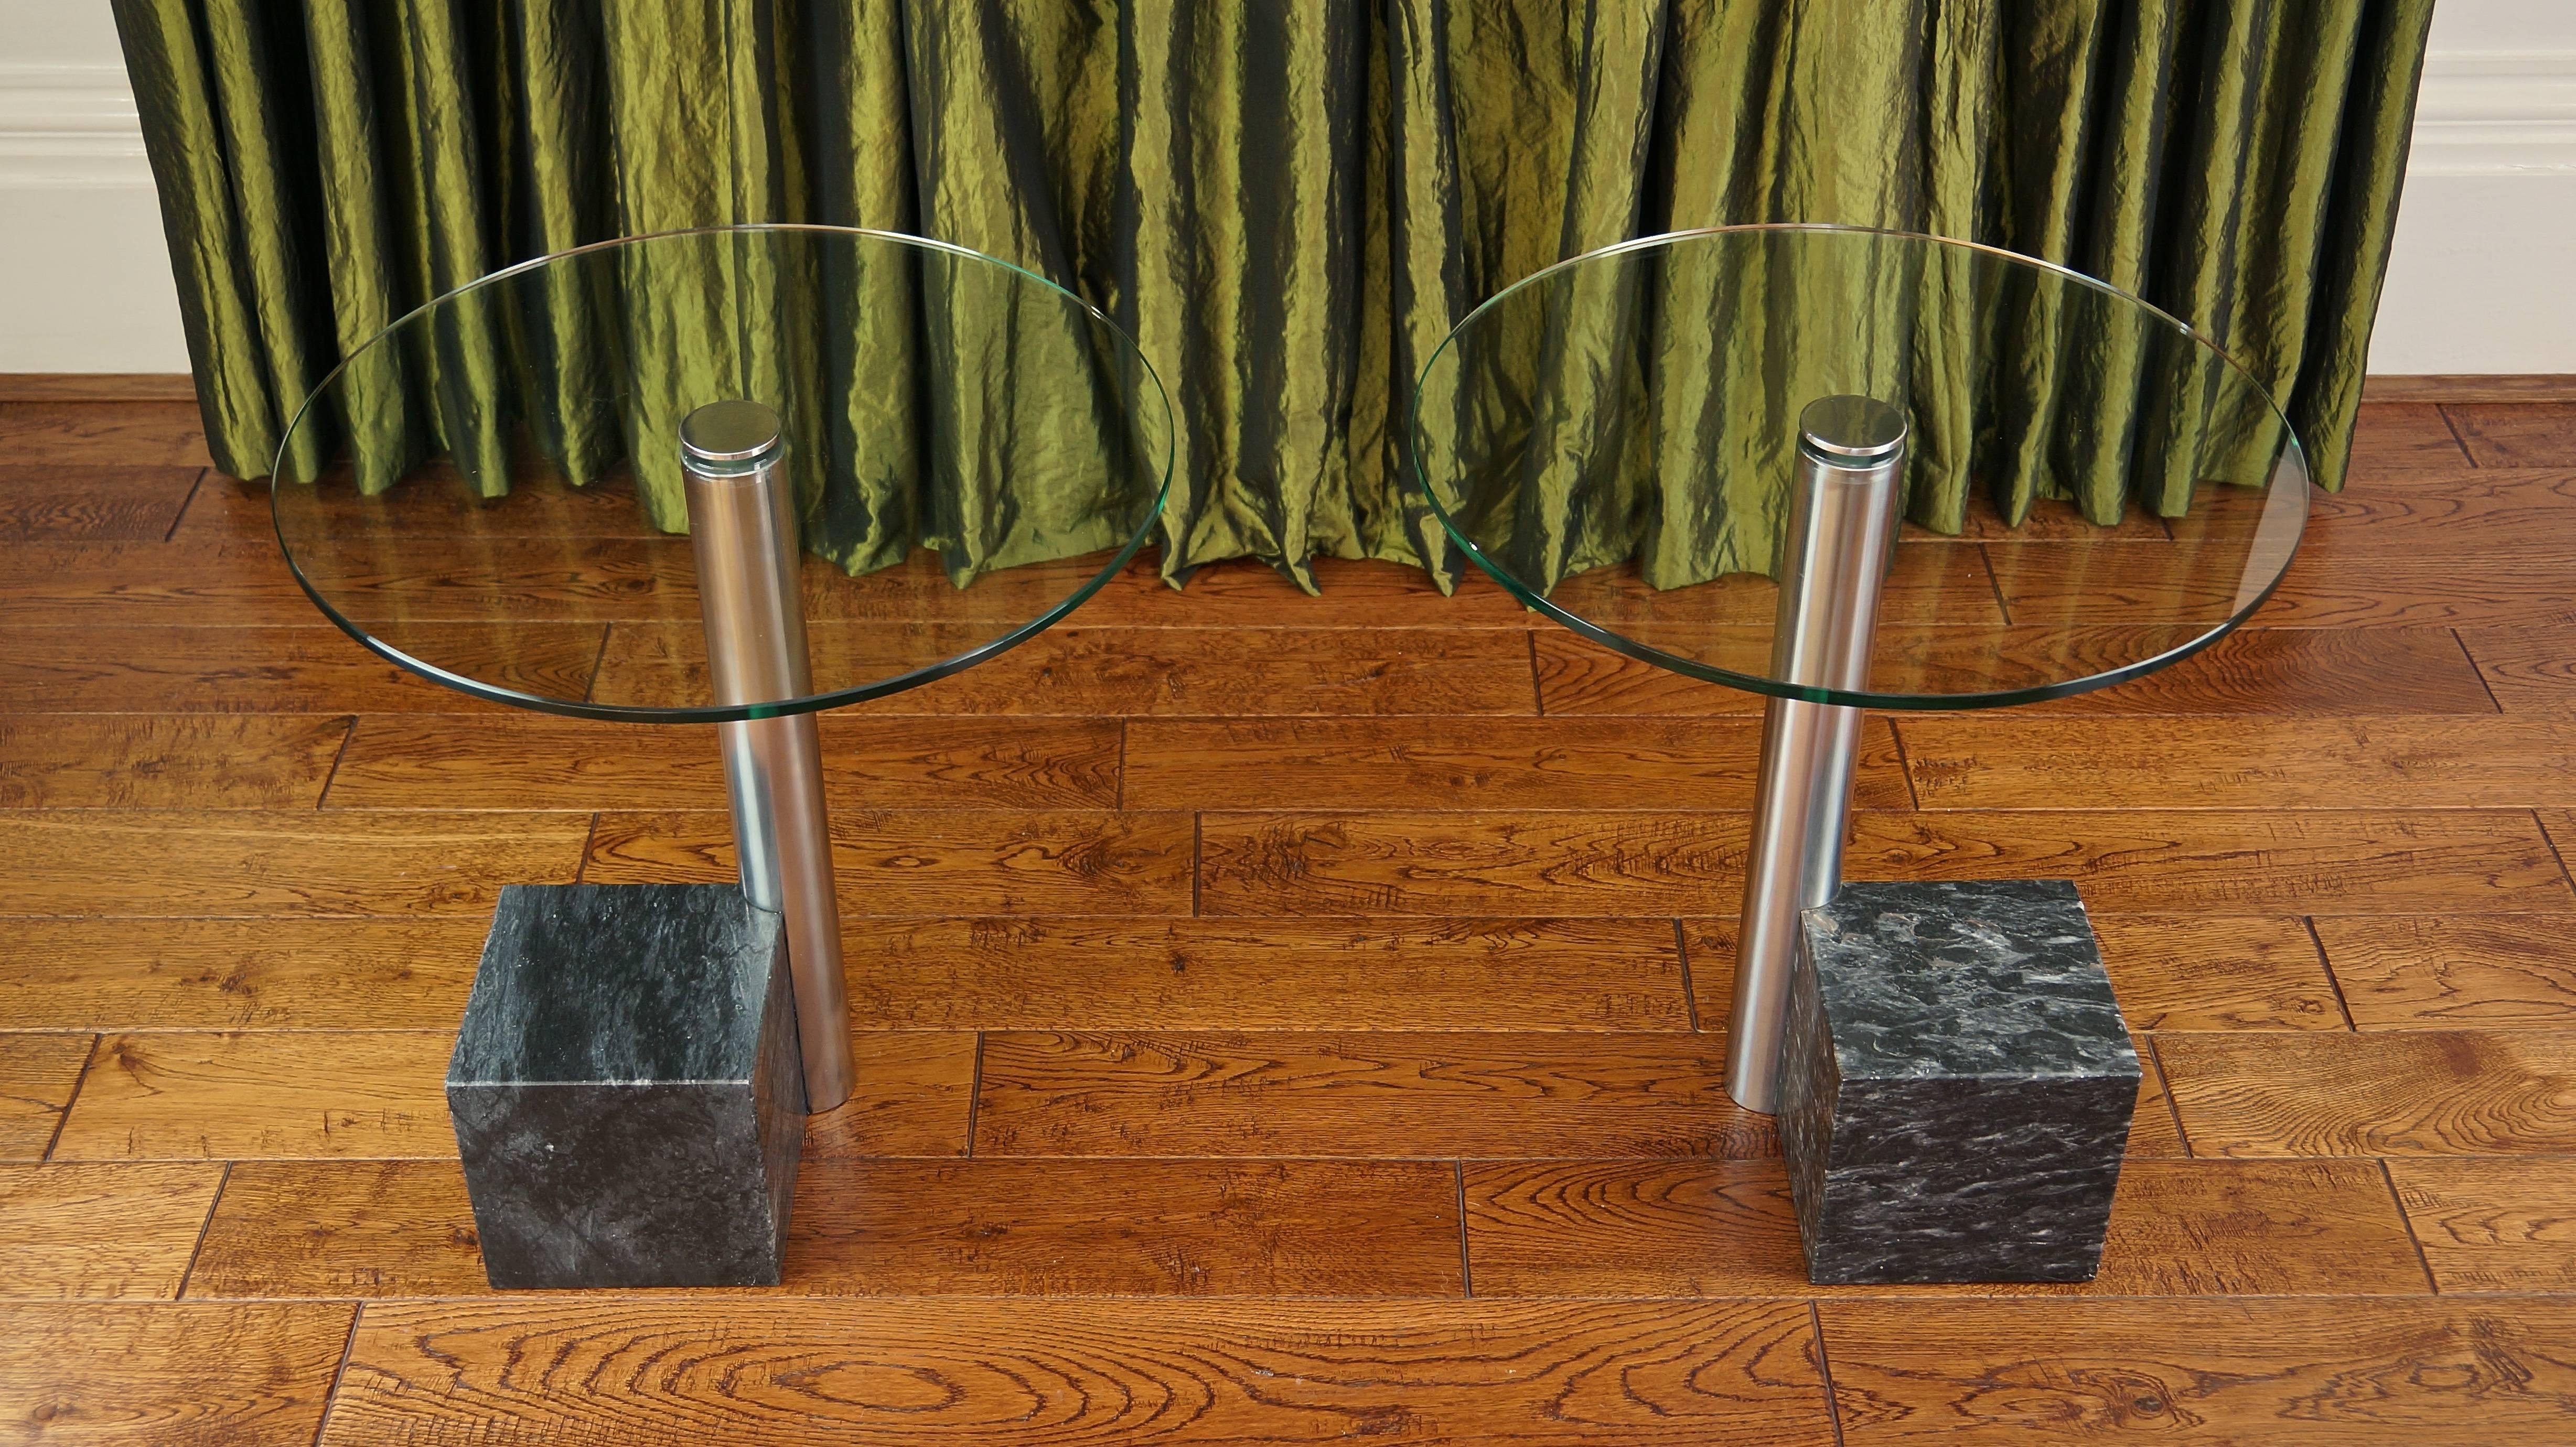 Pair of Vintage Marble and Glass HK2 Side Tables by Hank Kwint, Metaform 1980s 2